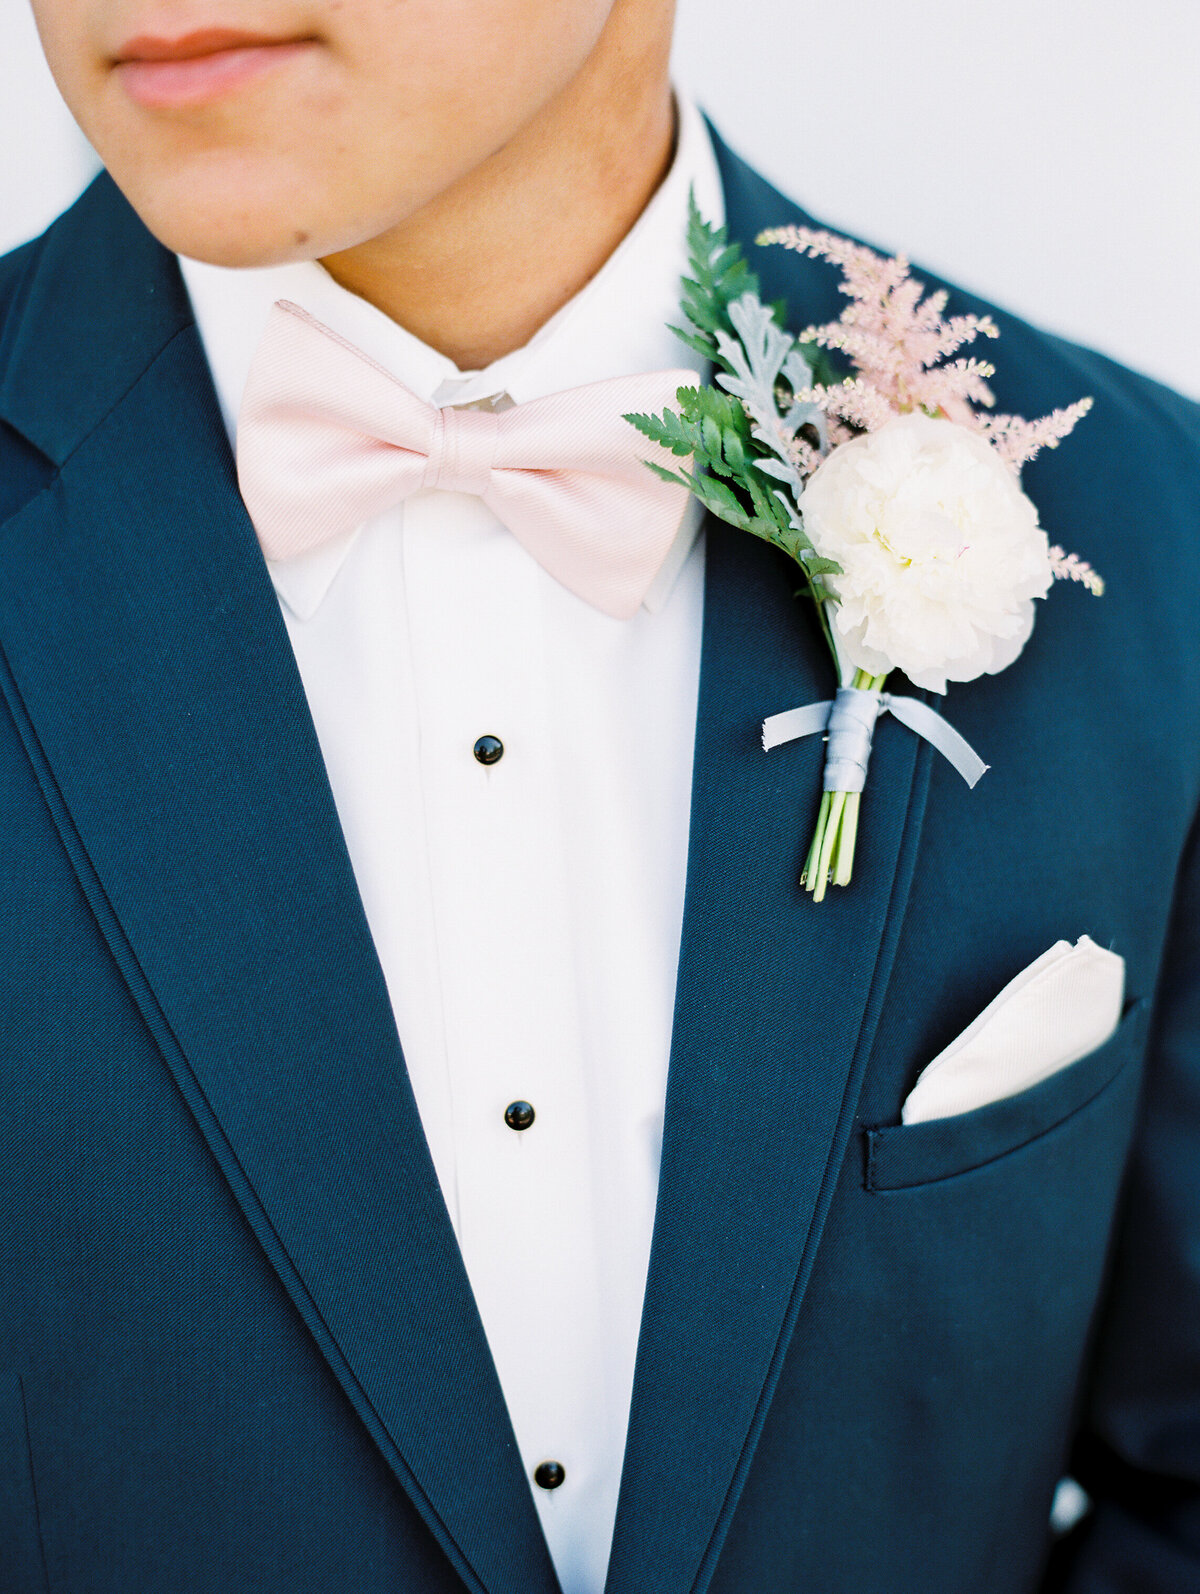 Close-up of groom's bowtie and boutonniere